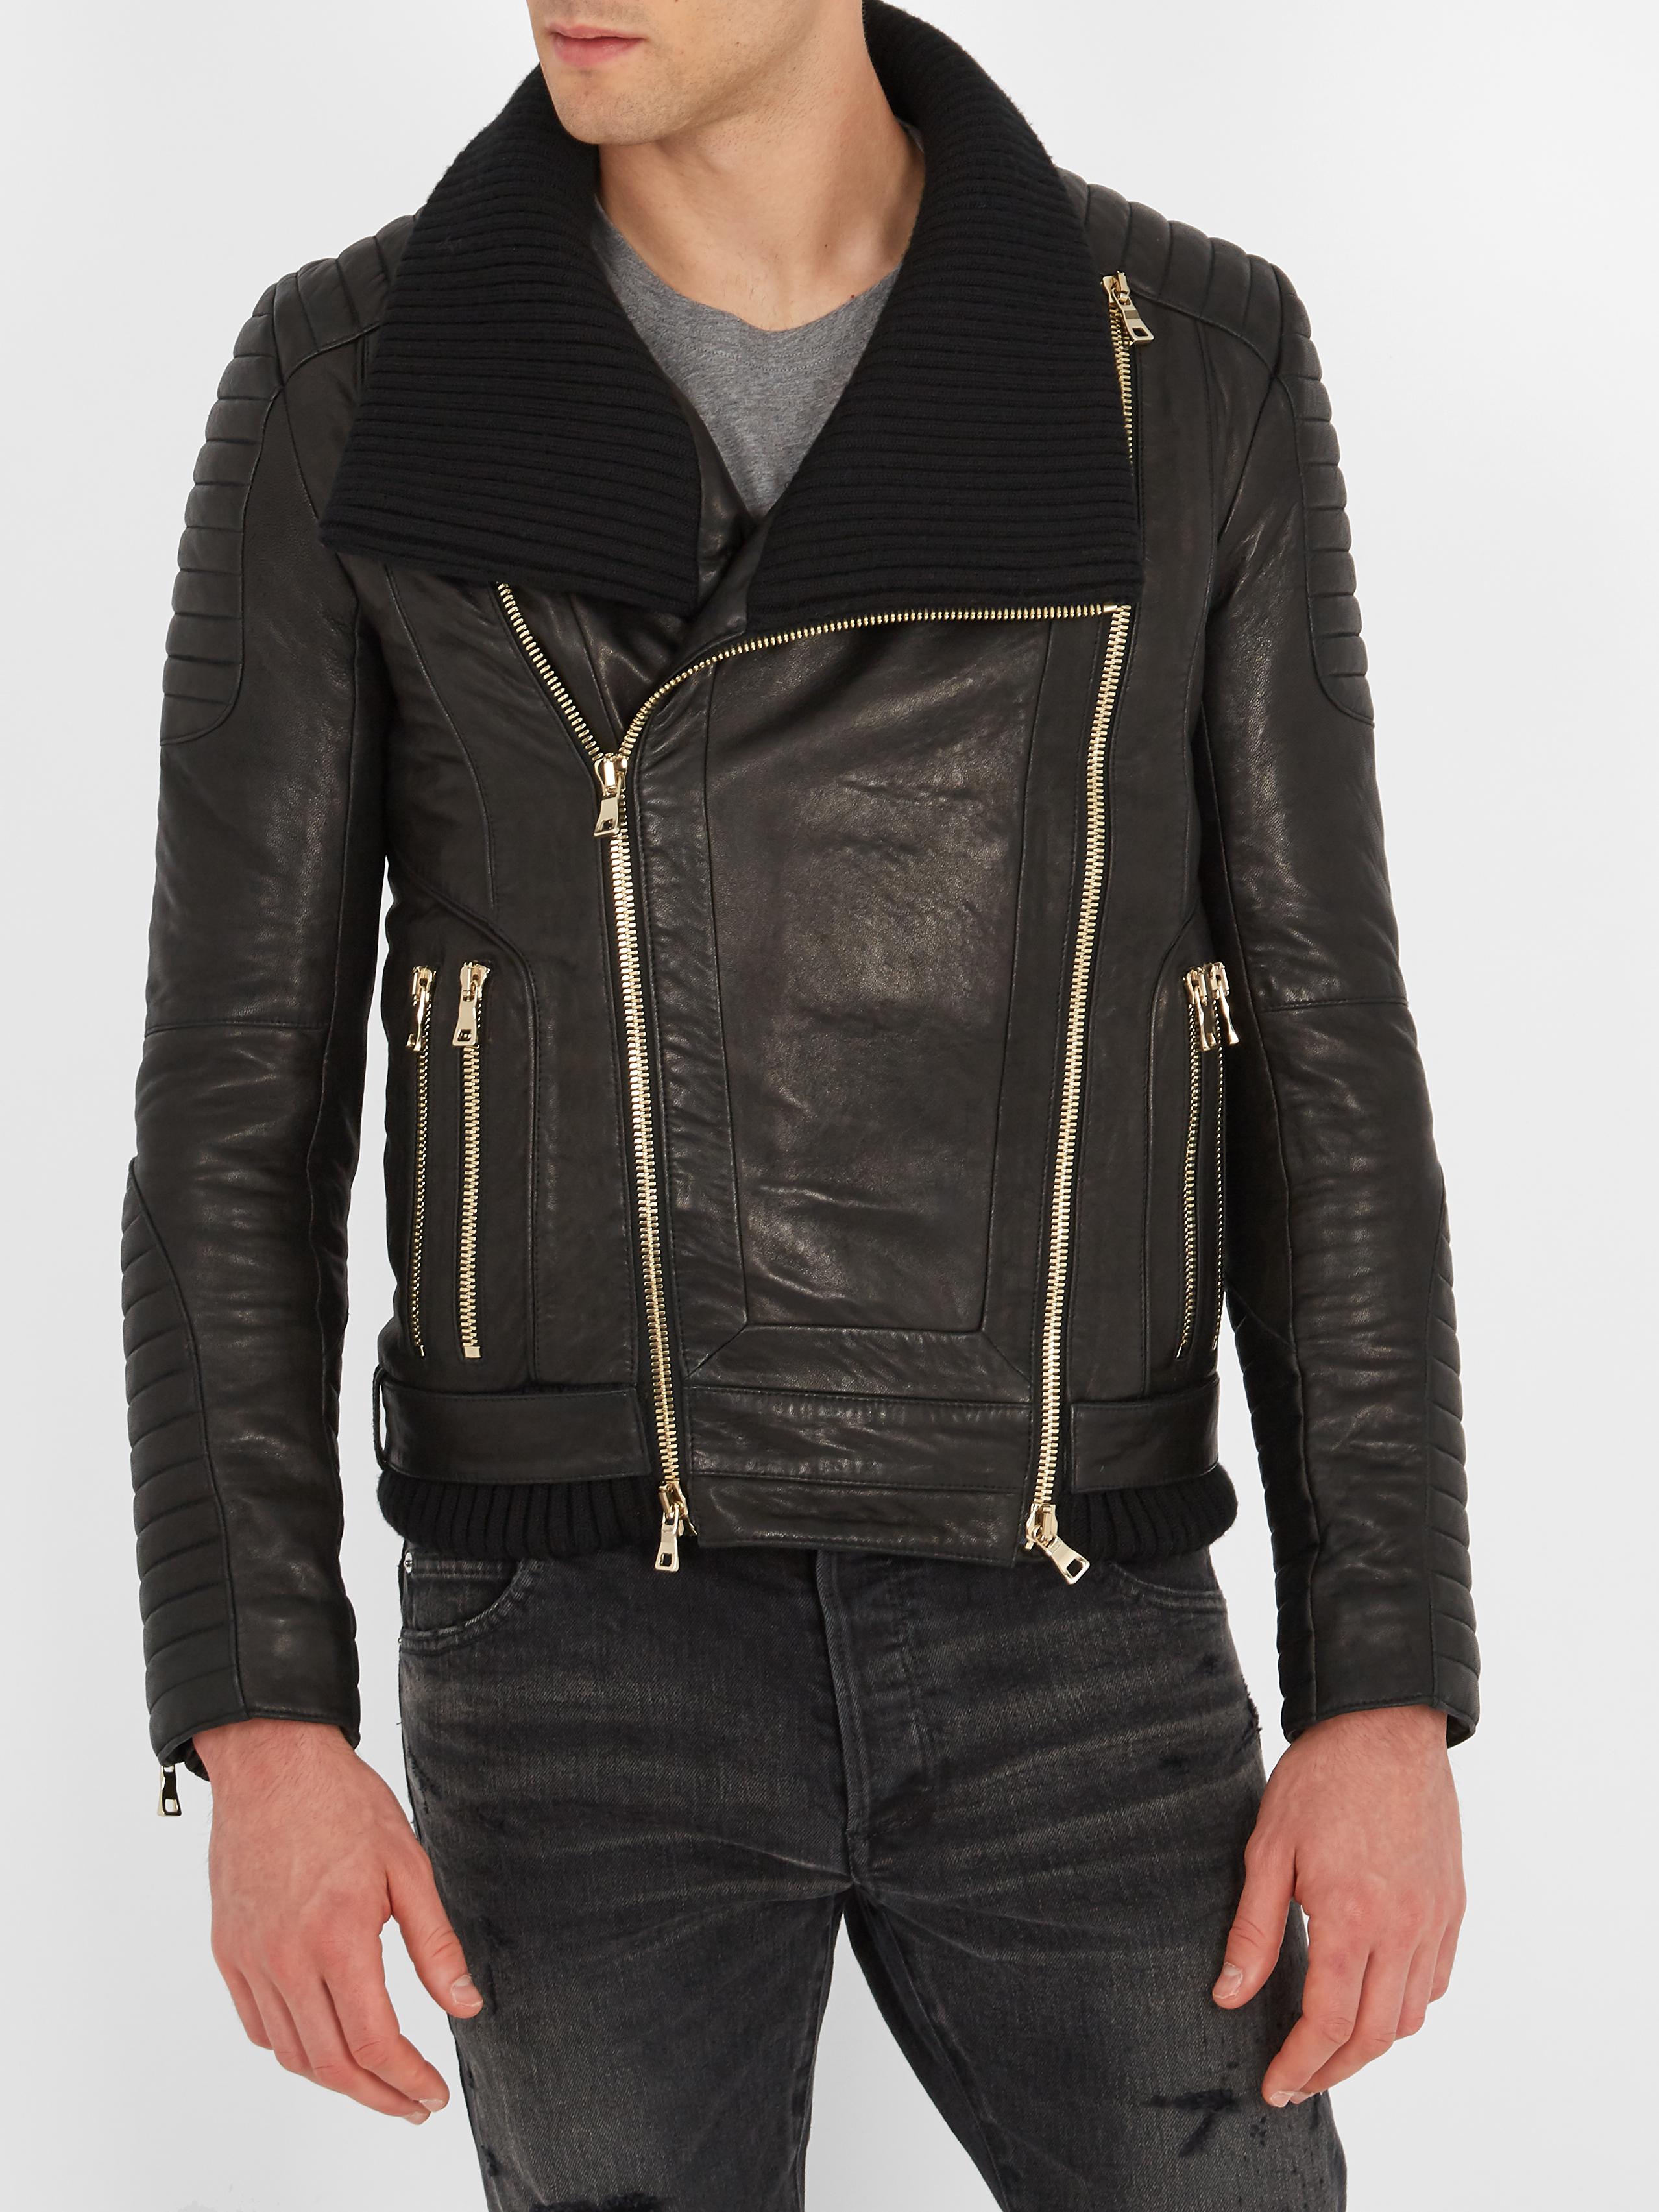 Balmain Ribbed-knit Leather Jacket in Black for Men Lyst